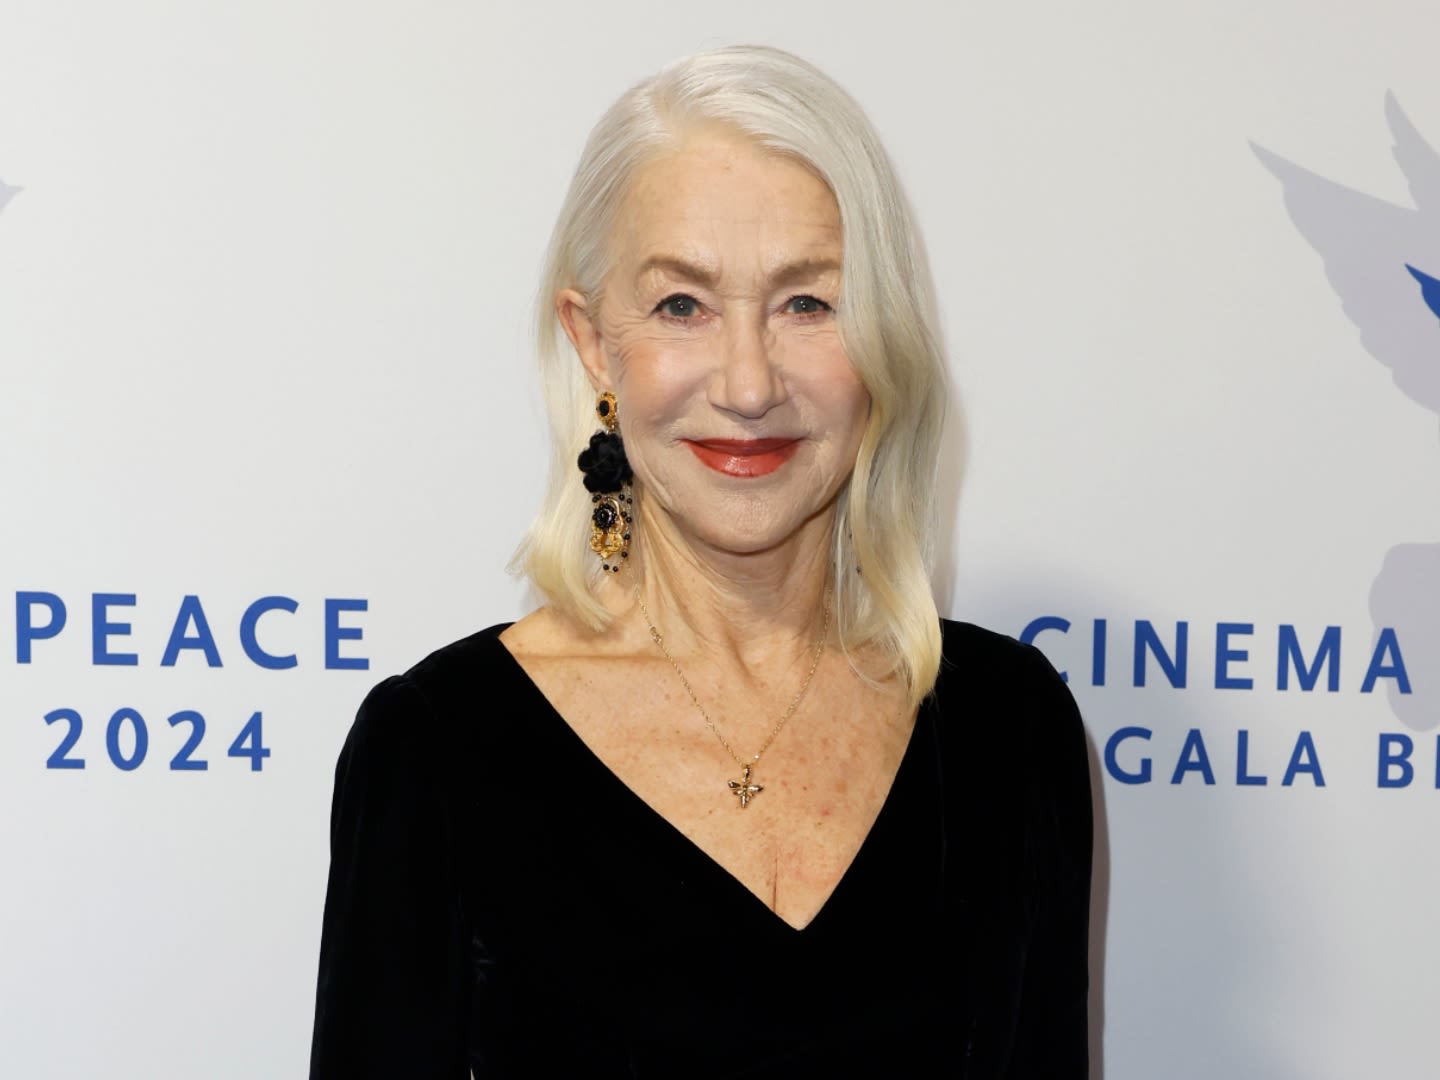 Mature Shoppers ‘Get So Many Compliments’ After Using This Helen Mirren-Approved Brand’s $17 Eye Cream